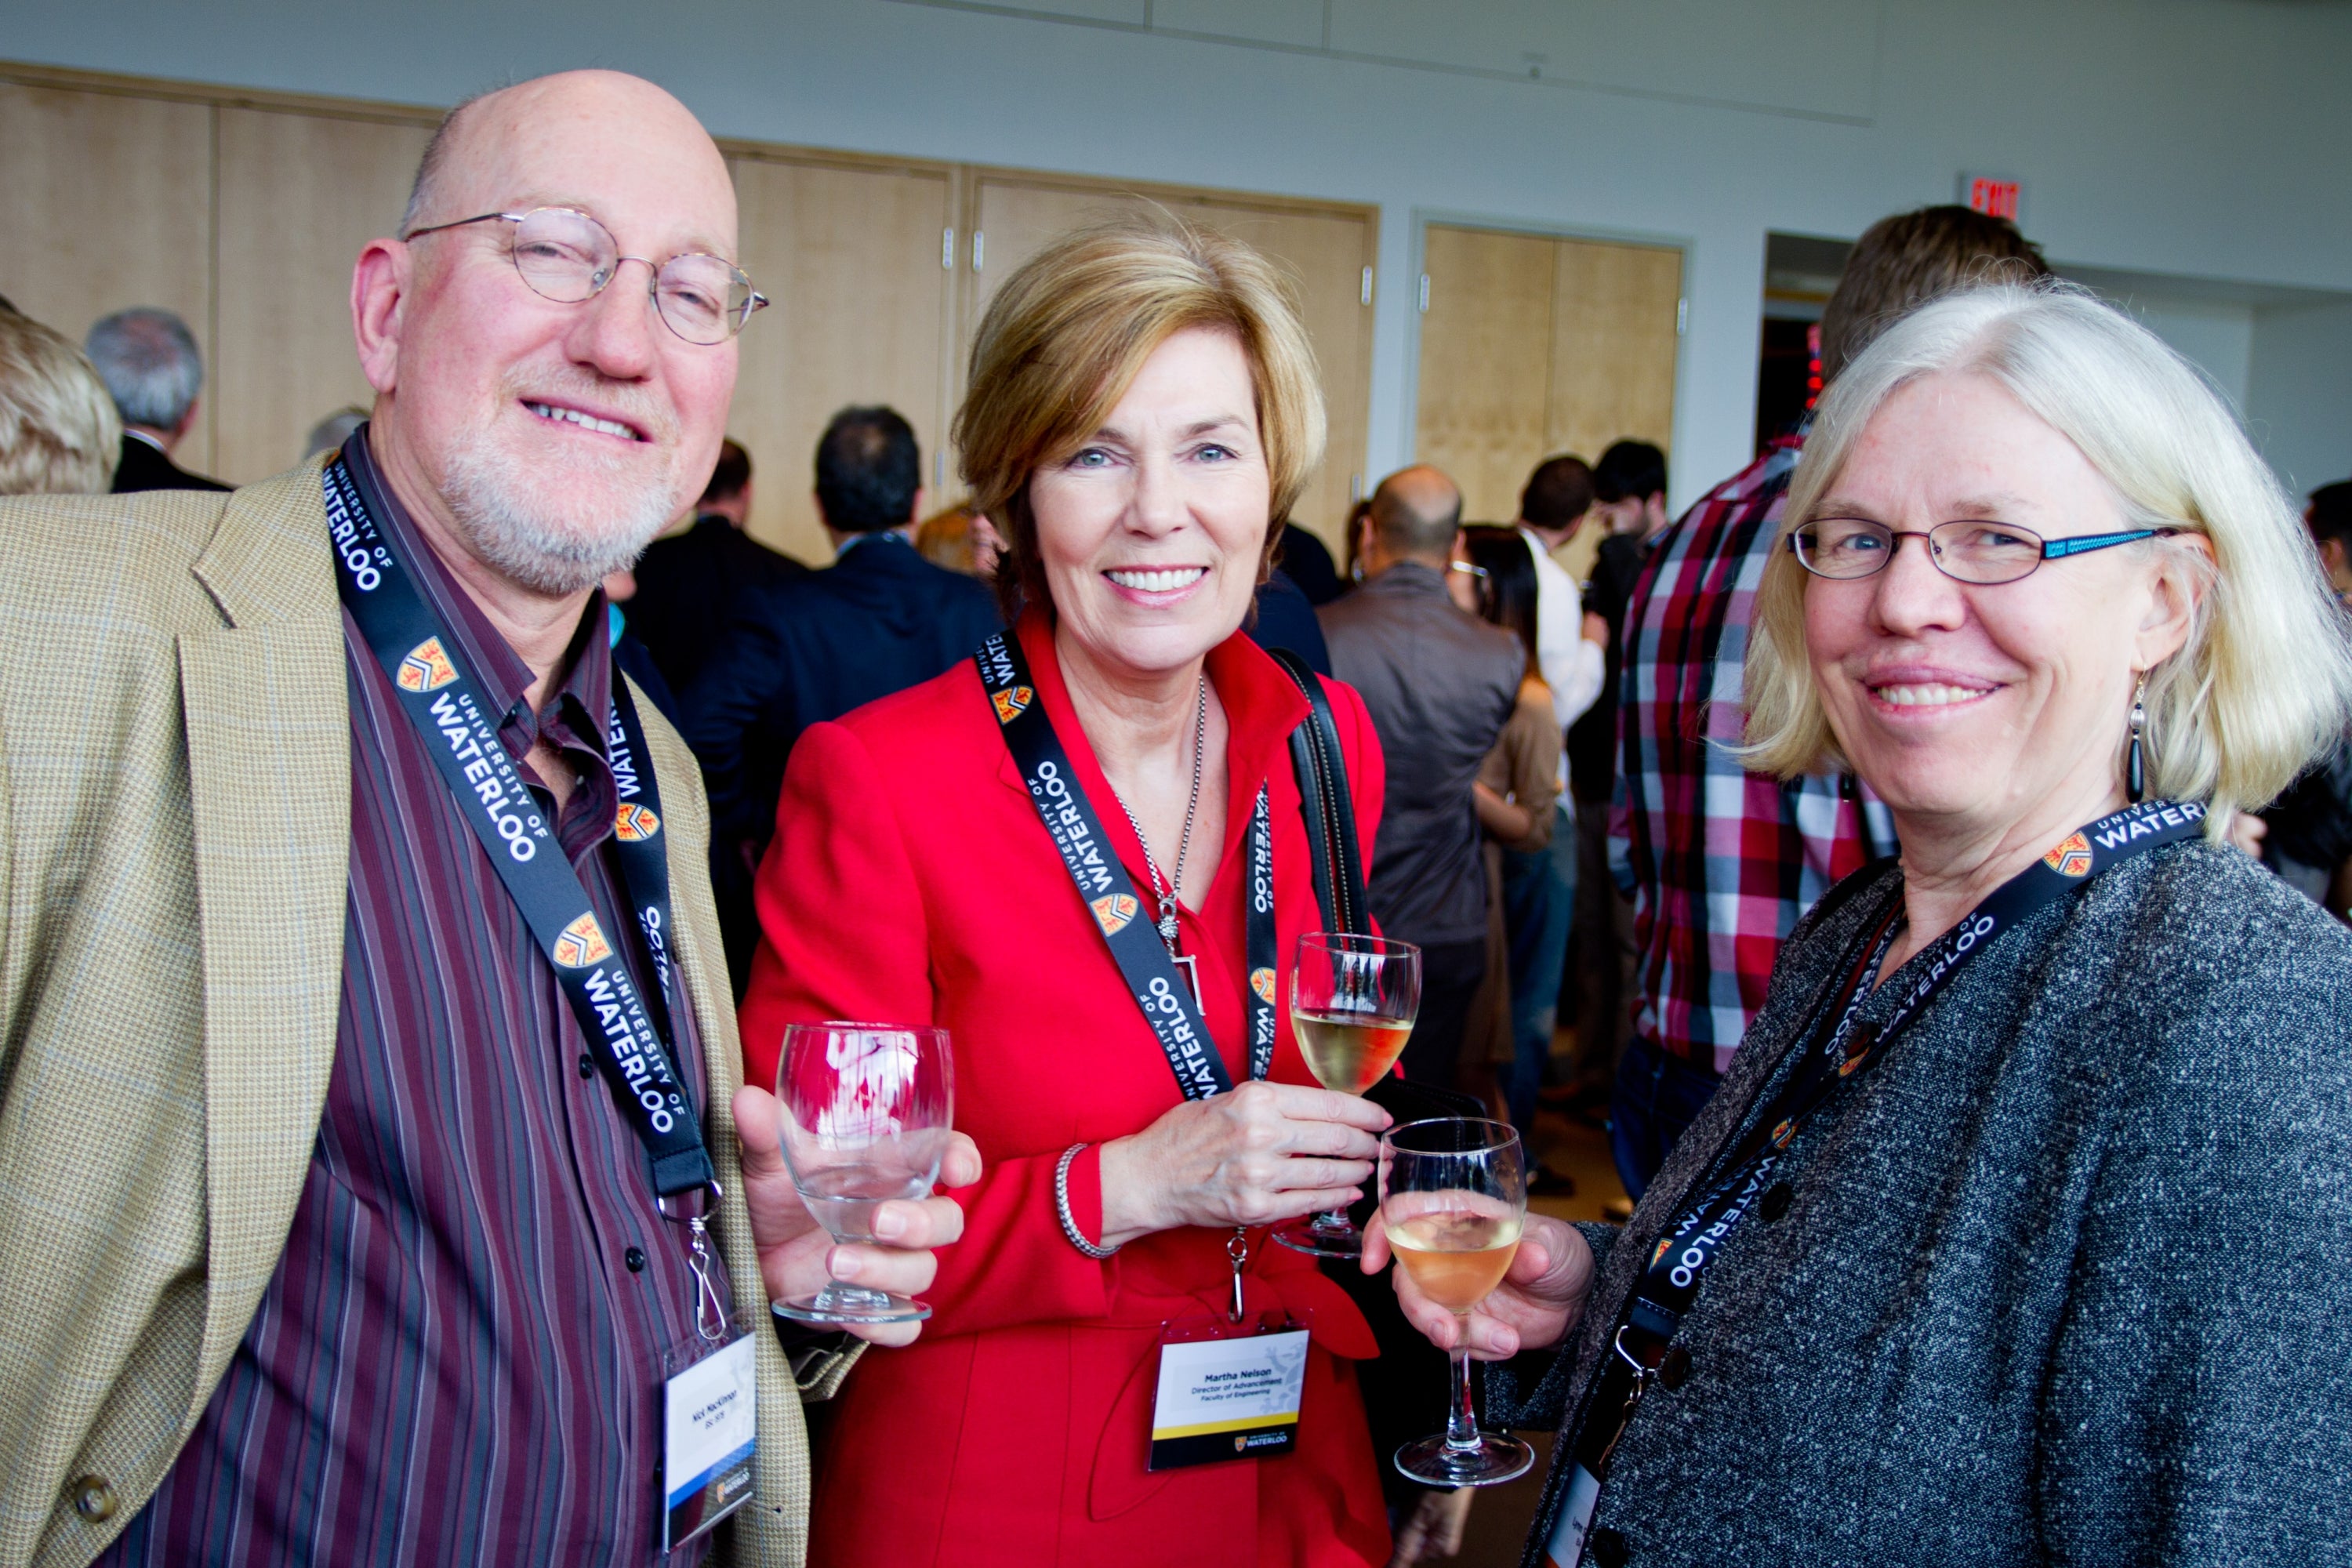 Three alumni posing at a networking event